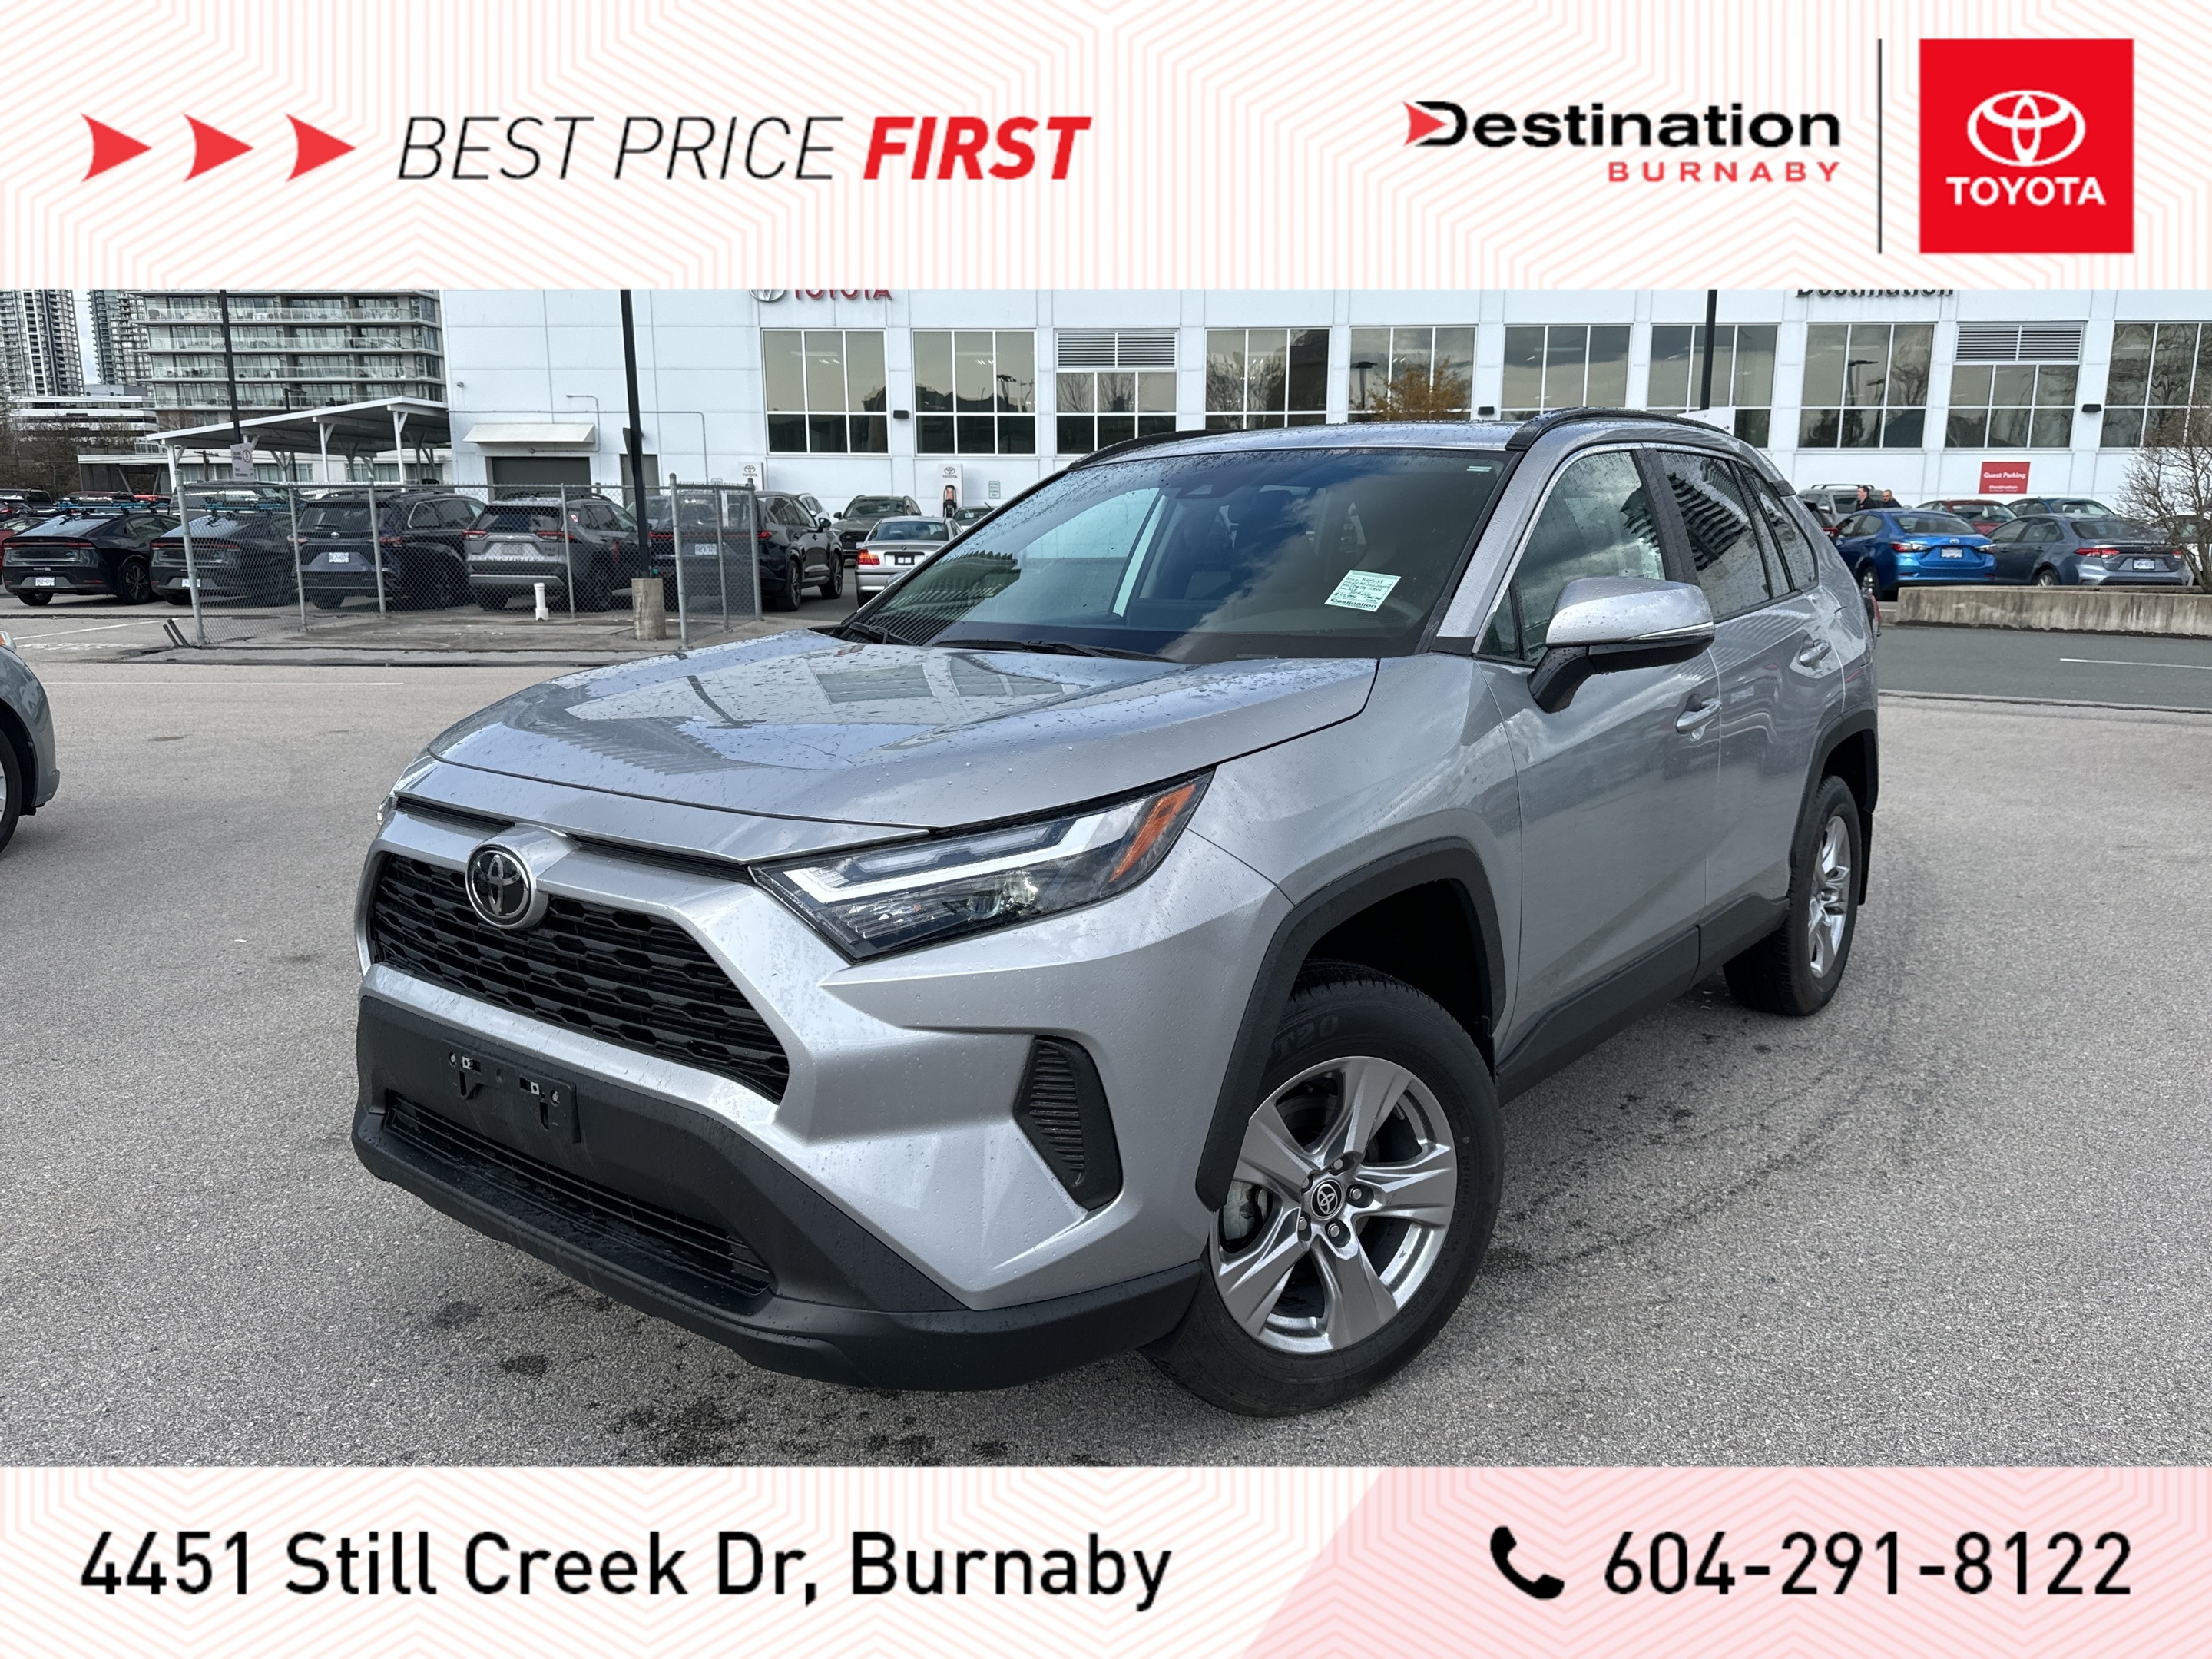 2022 Toyota RAV4 XLE AWD - Local No Accidents 1owner!